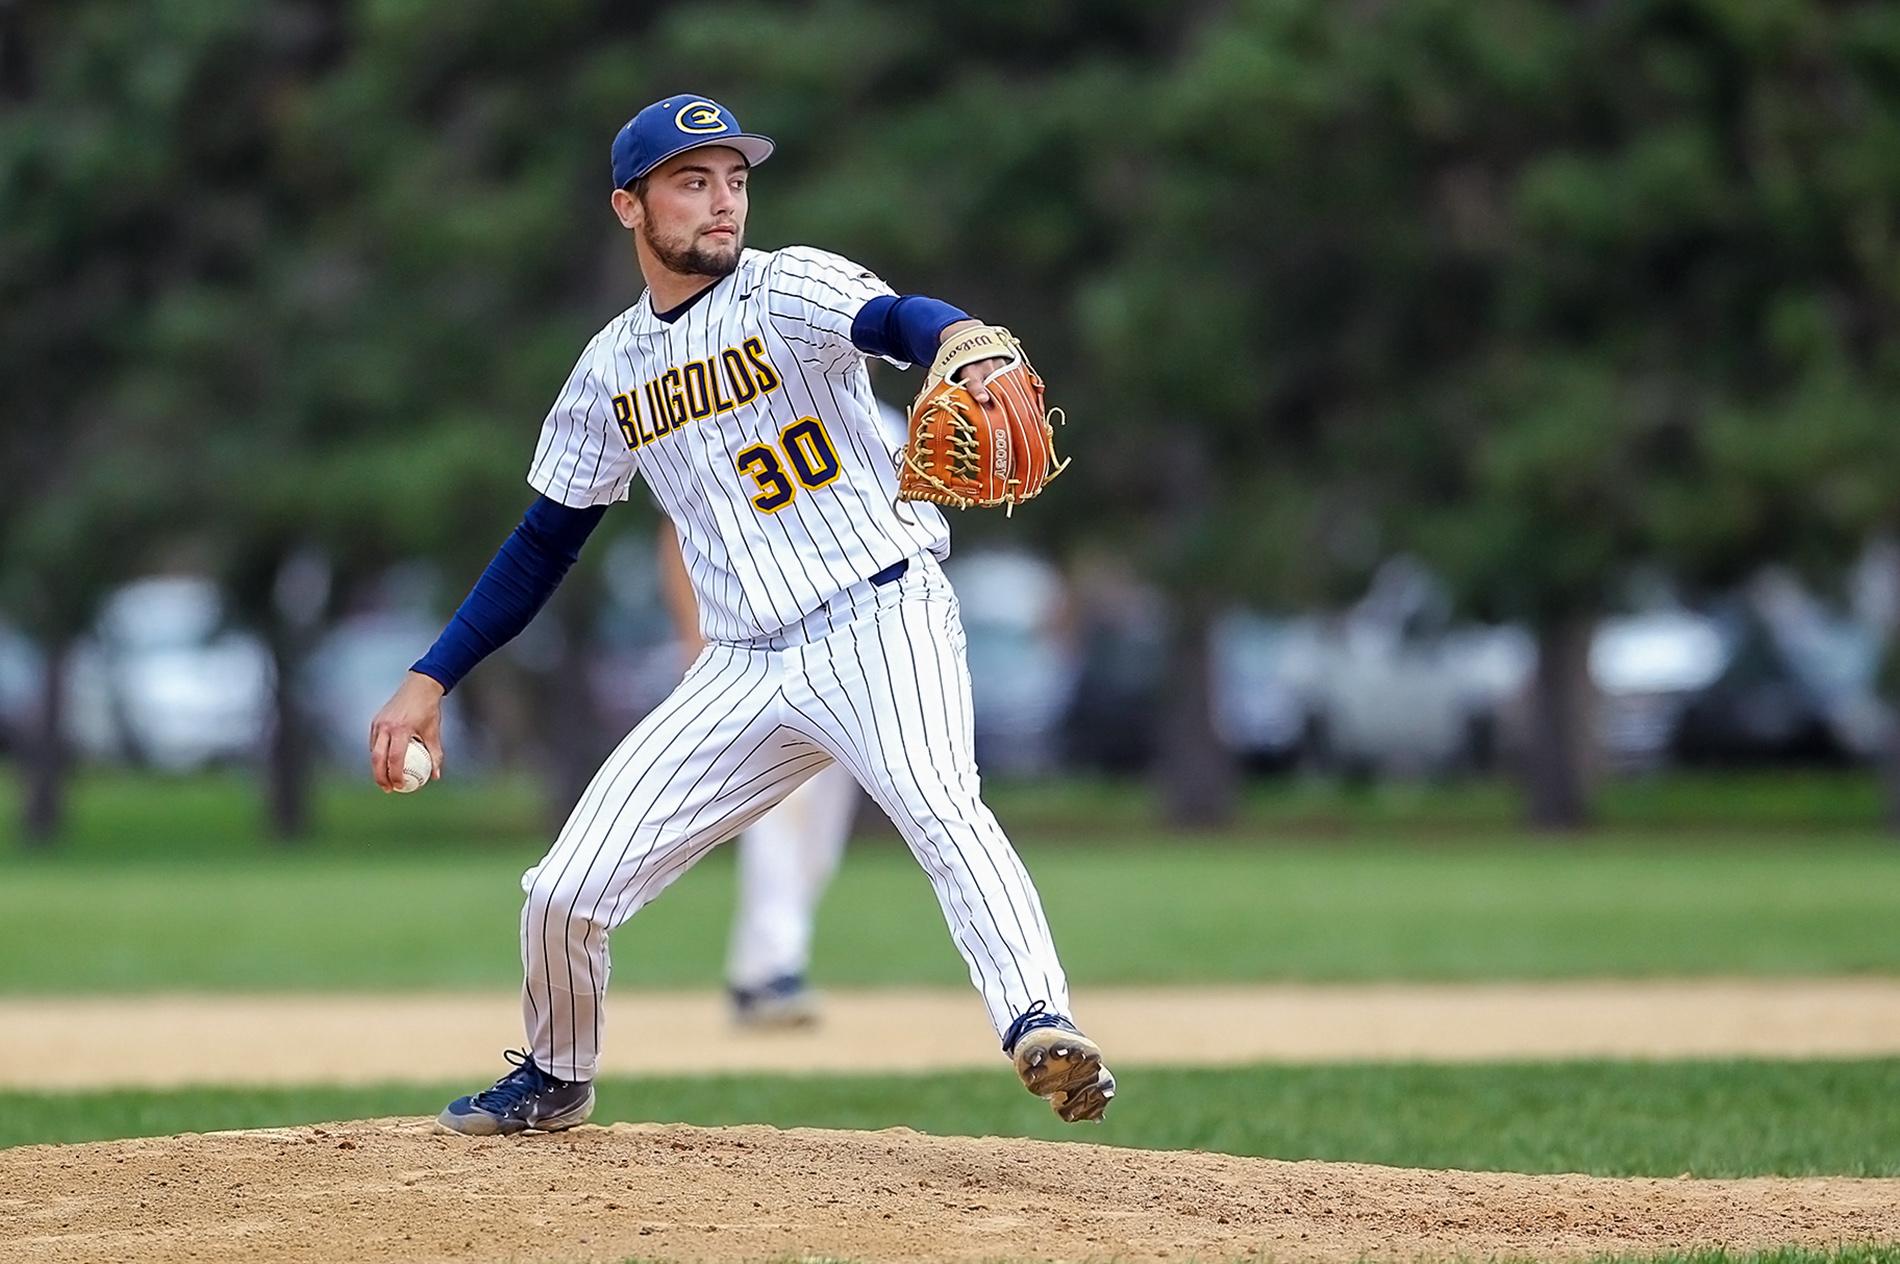 Blugolds Fall Short To Eagles